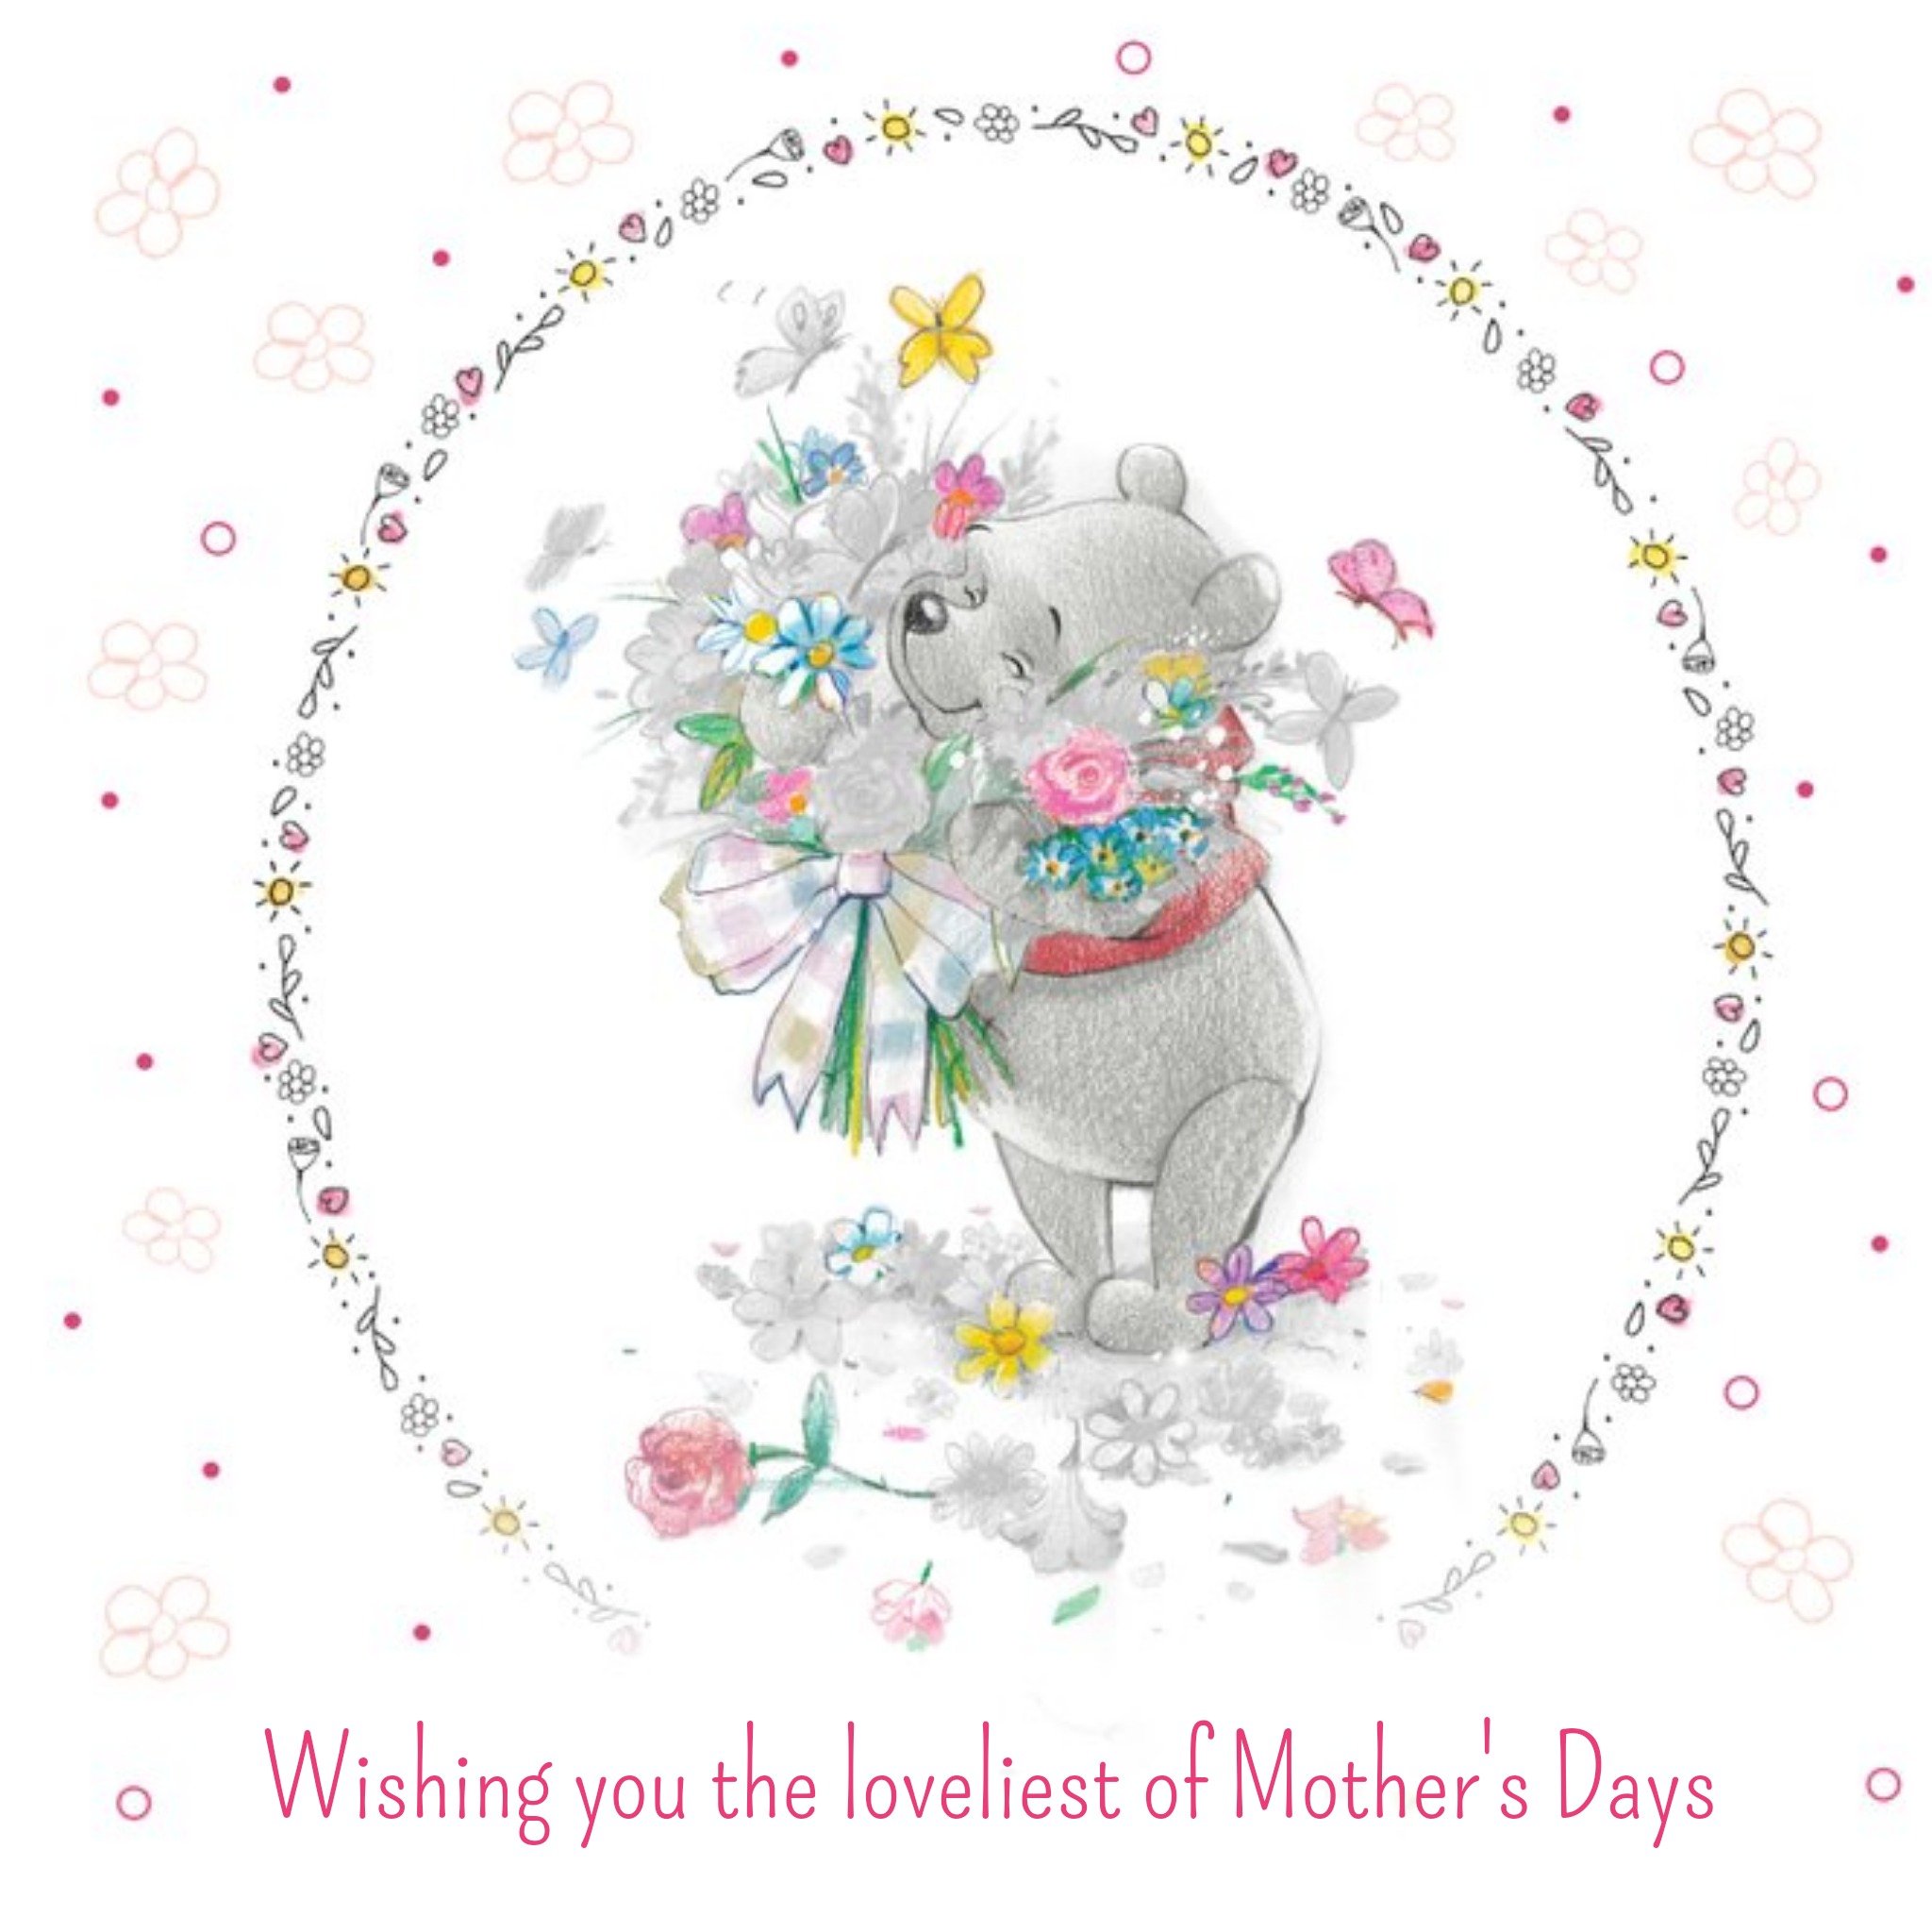 Disney Winnie The Pooh Wishing You The Loveliest Of Days Mum Card, Square